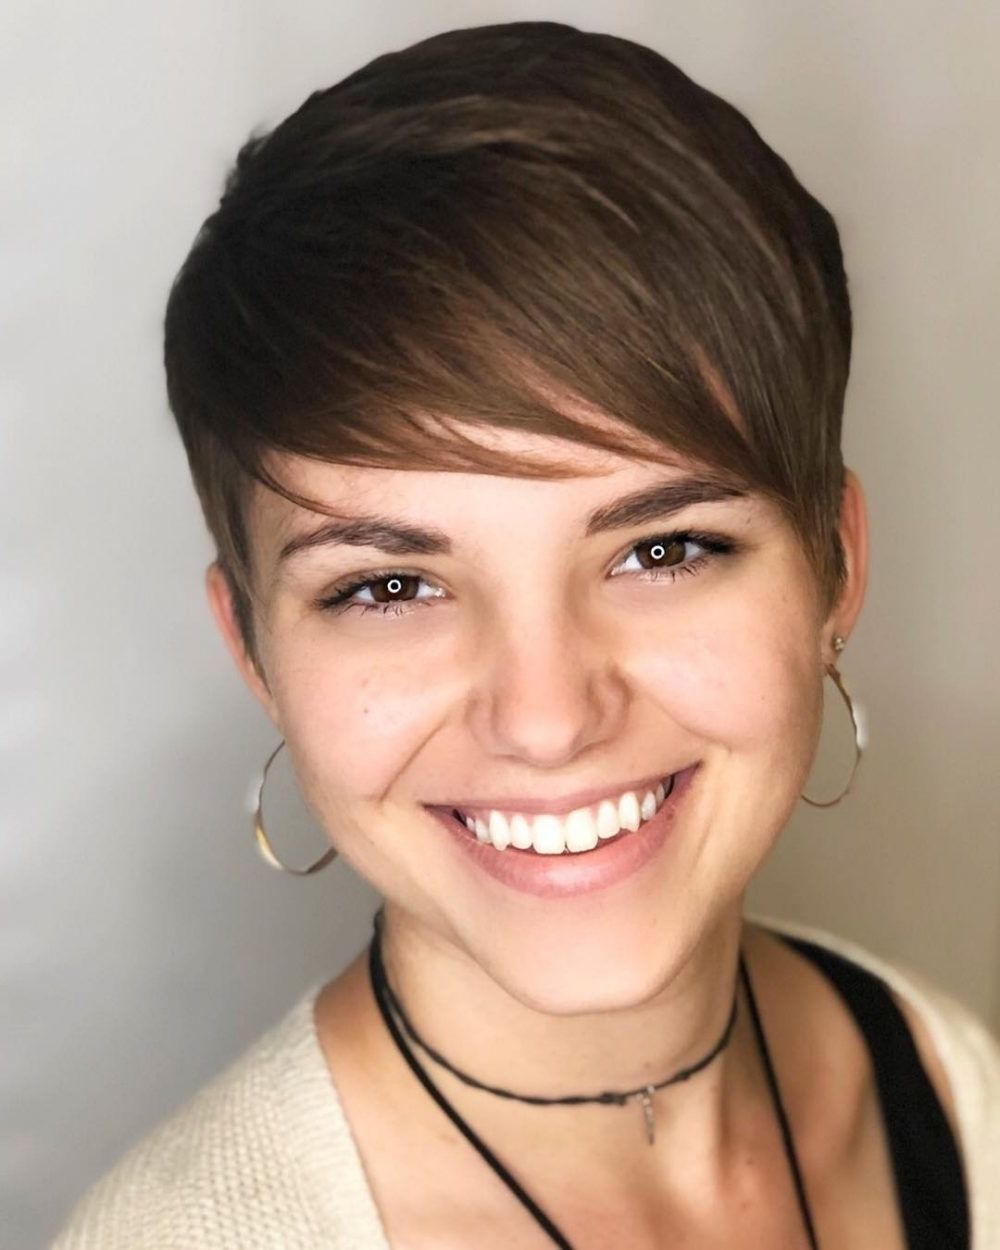 33 Flattering Short Hairstyles For Round Faces In 2018 Within Most Current Short Choppy Side Parted Pixie Haircuts (View 11 of 15)